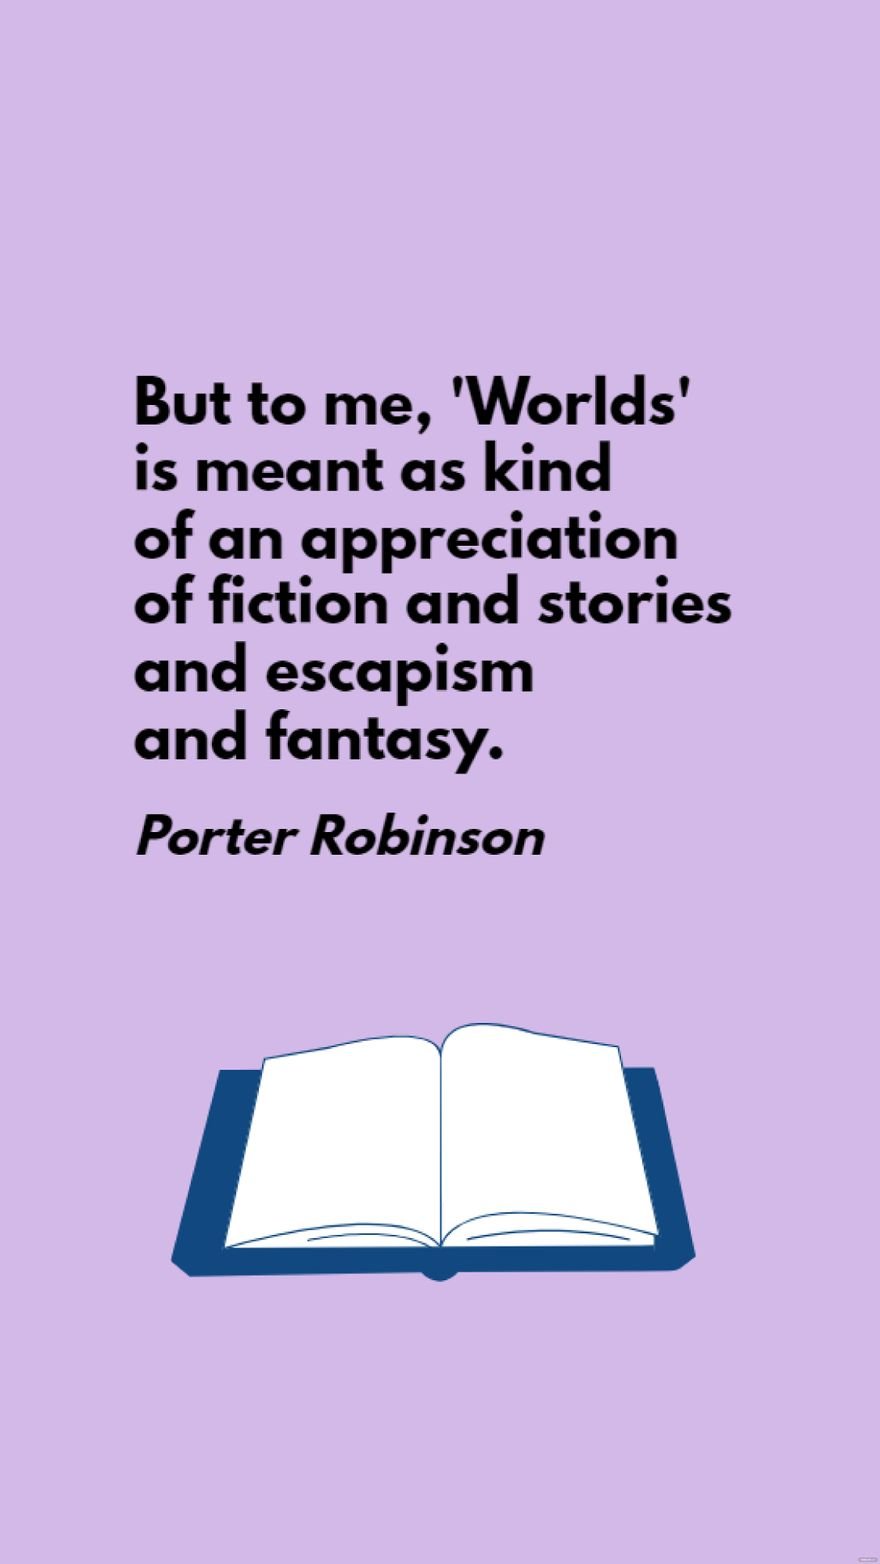 Porter Robinson - But to me, 'Worlds' is meant as kind of an appreciation of fiction and stories and escapism and fantasy.